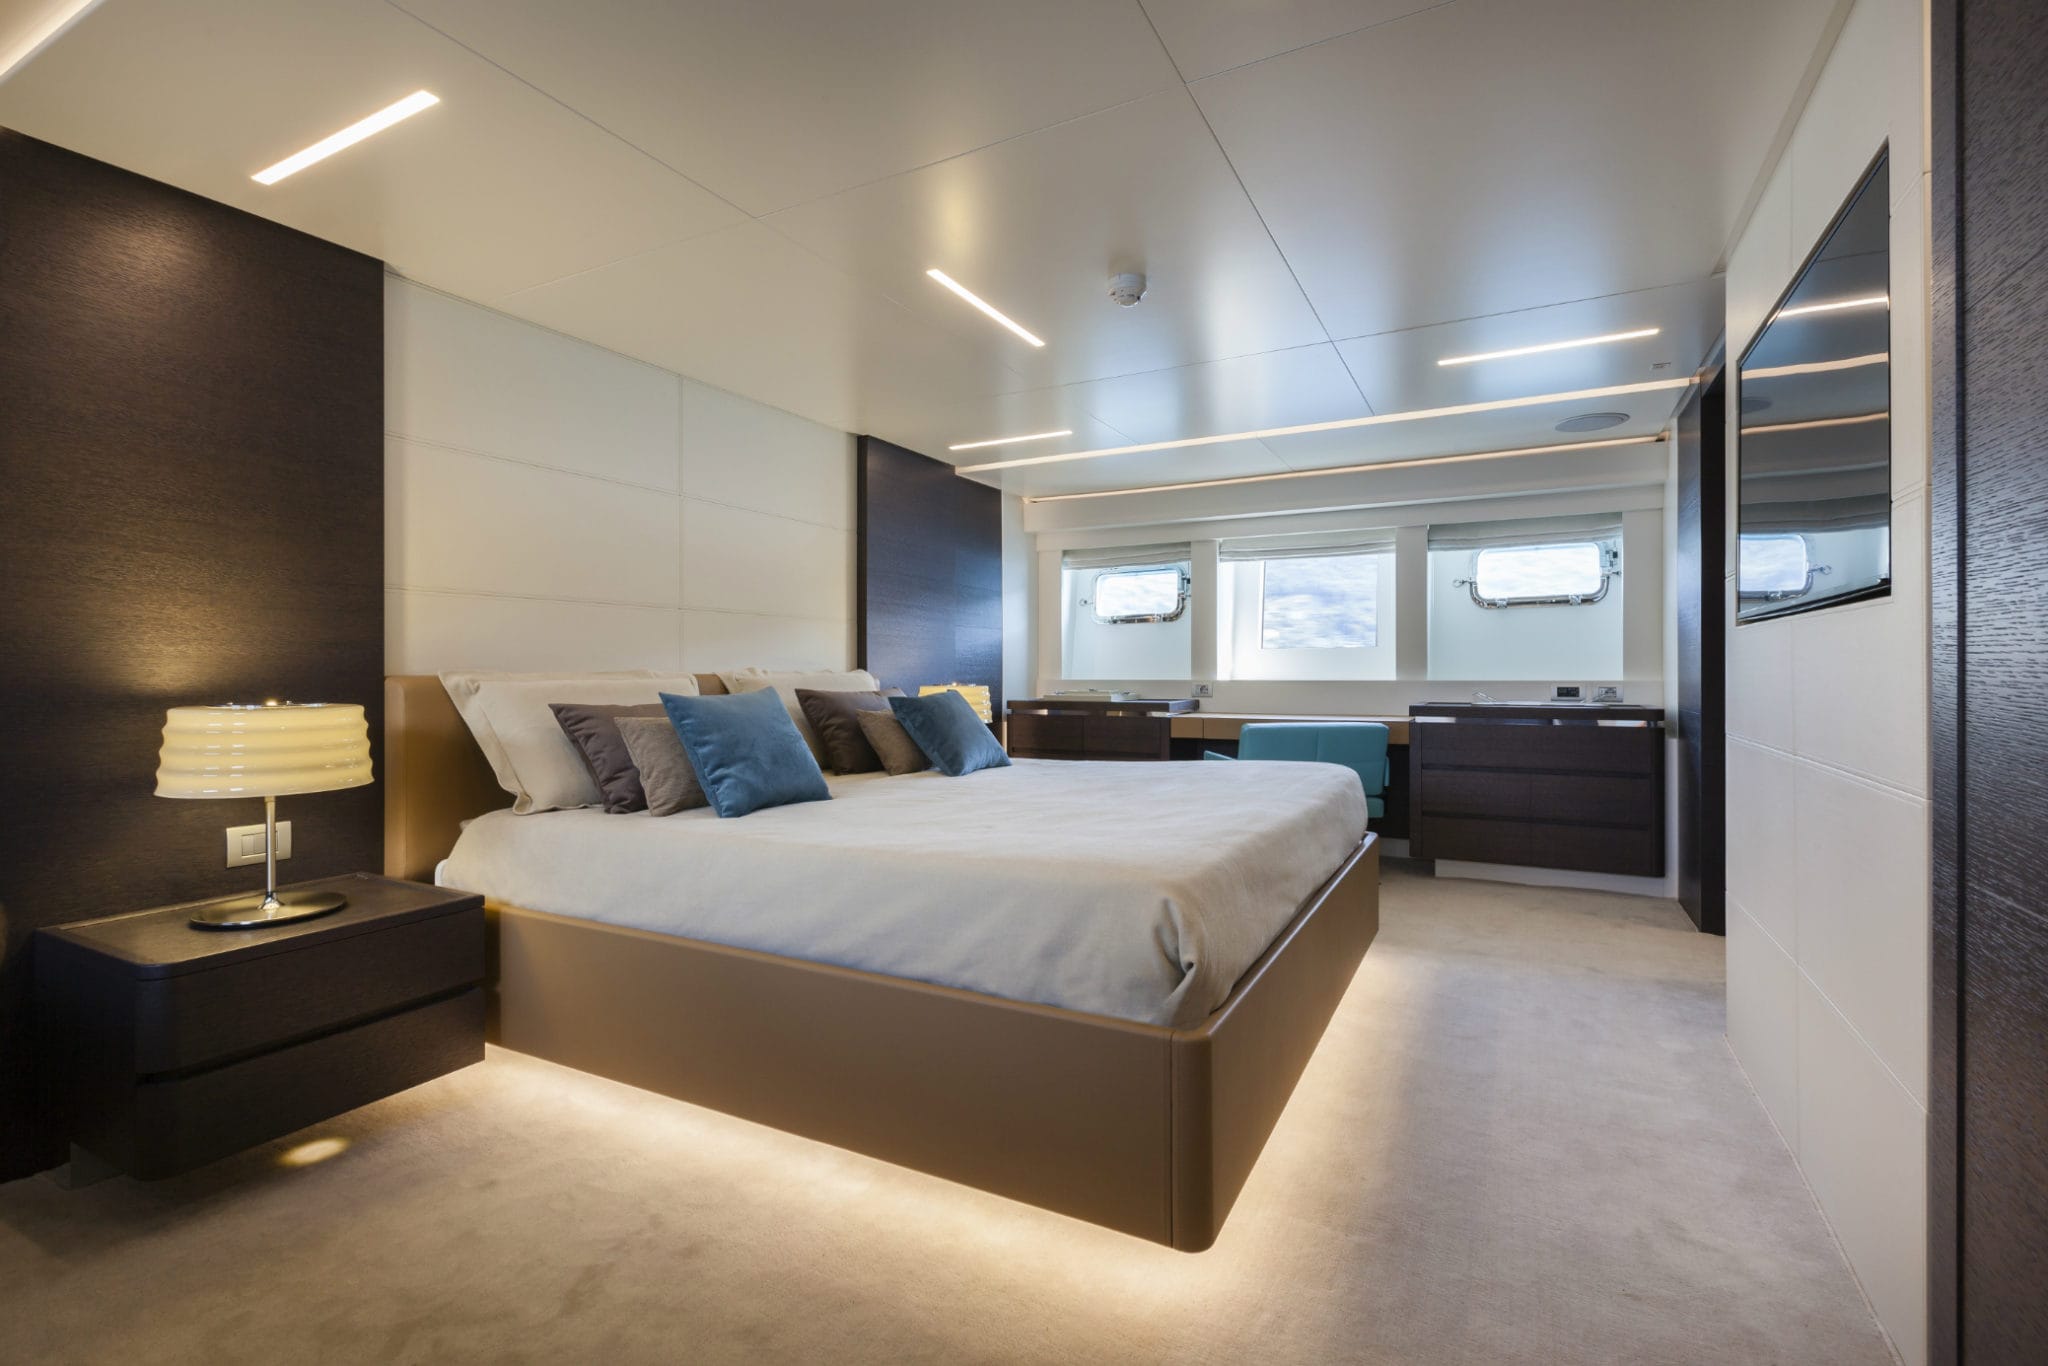 On Board of a Yacht, bed room